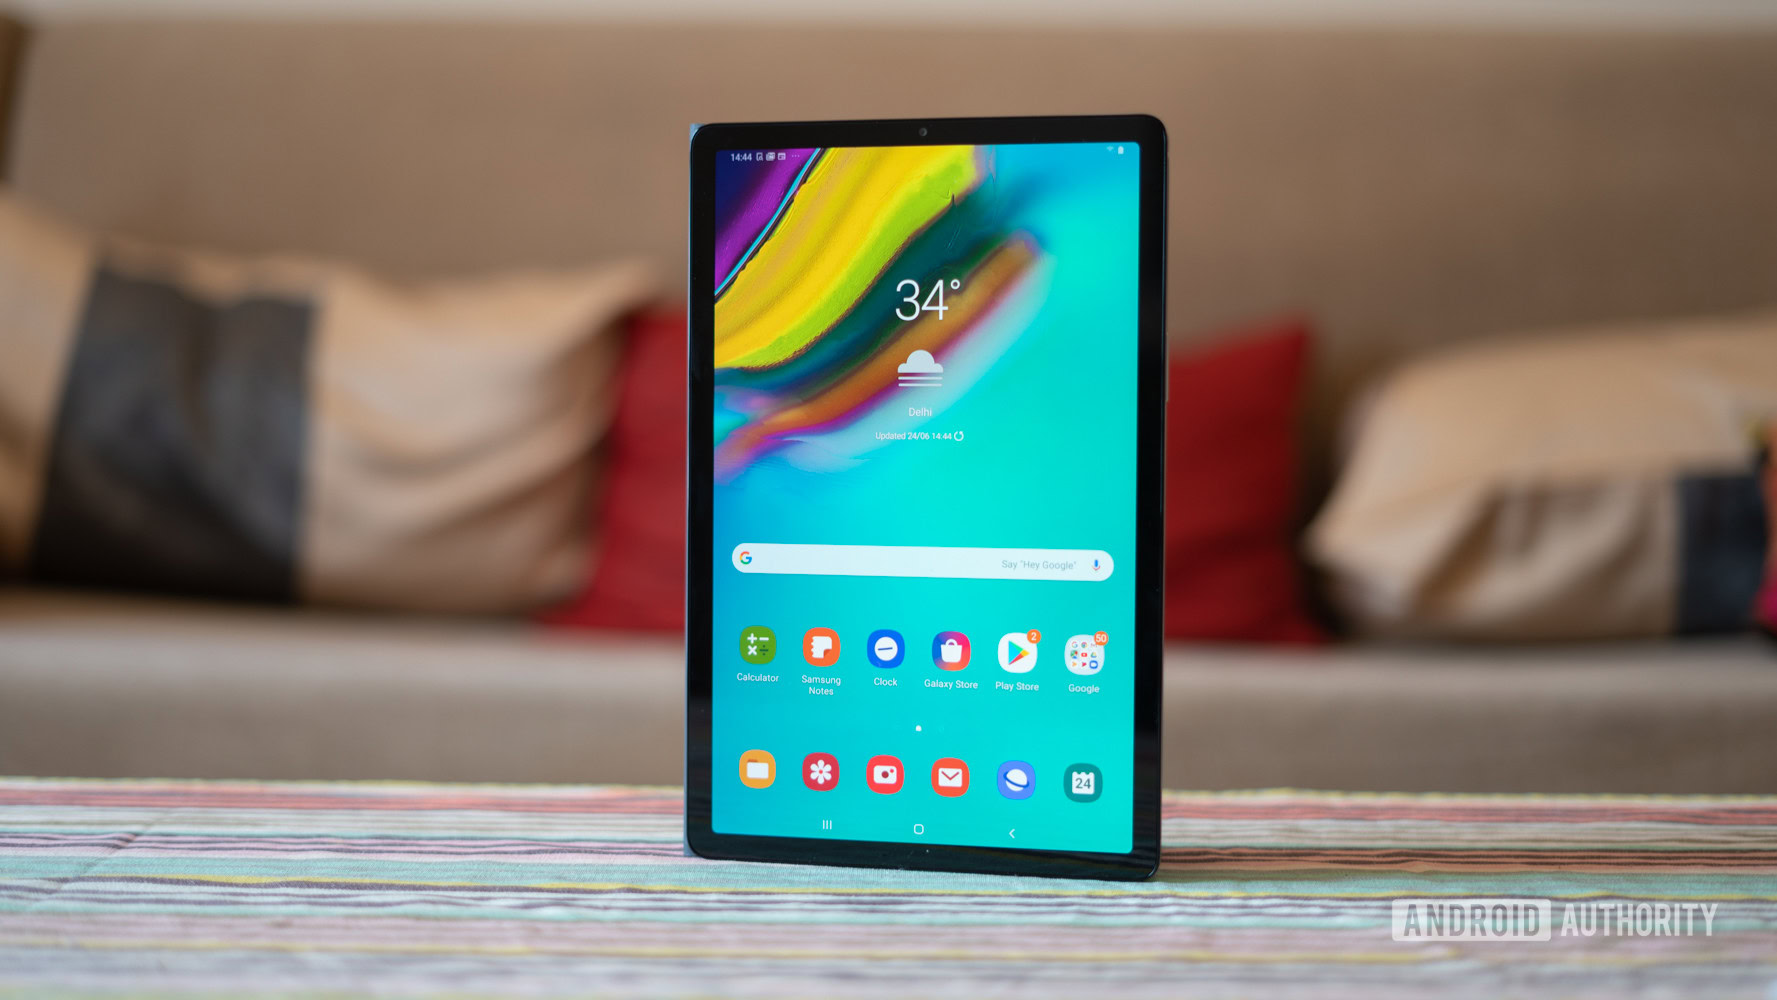 Samsung Galaxy Tab S5e hands-on: The best tablet around?